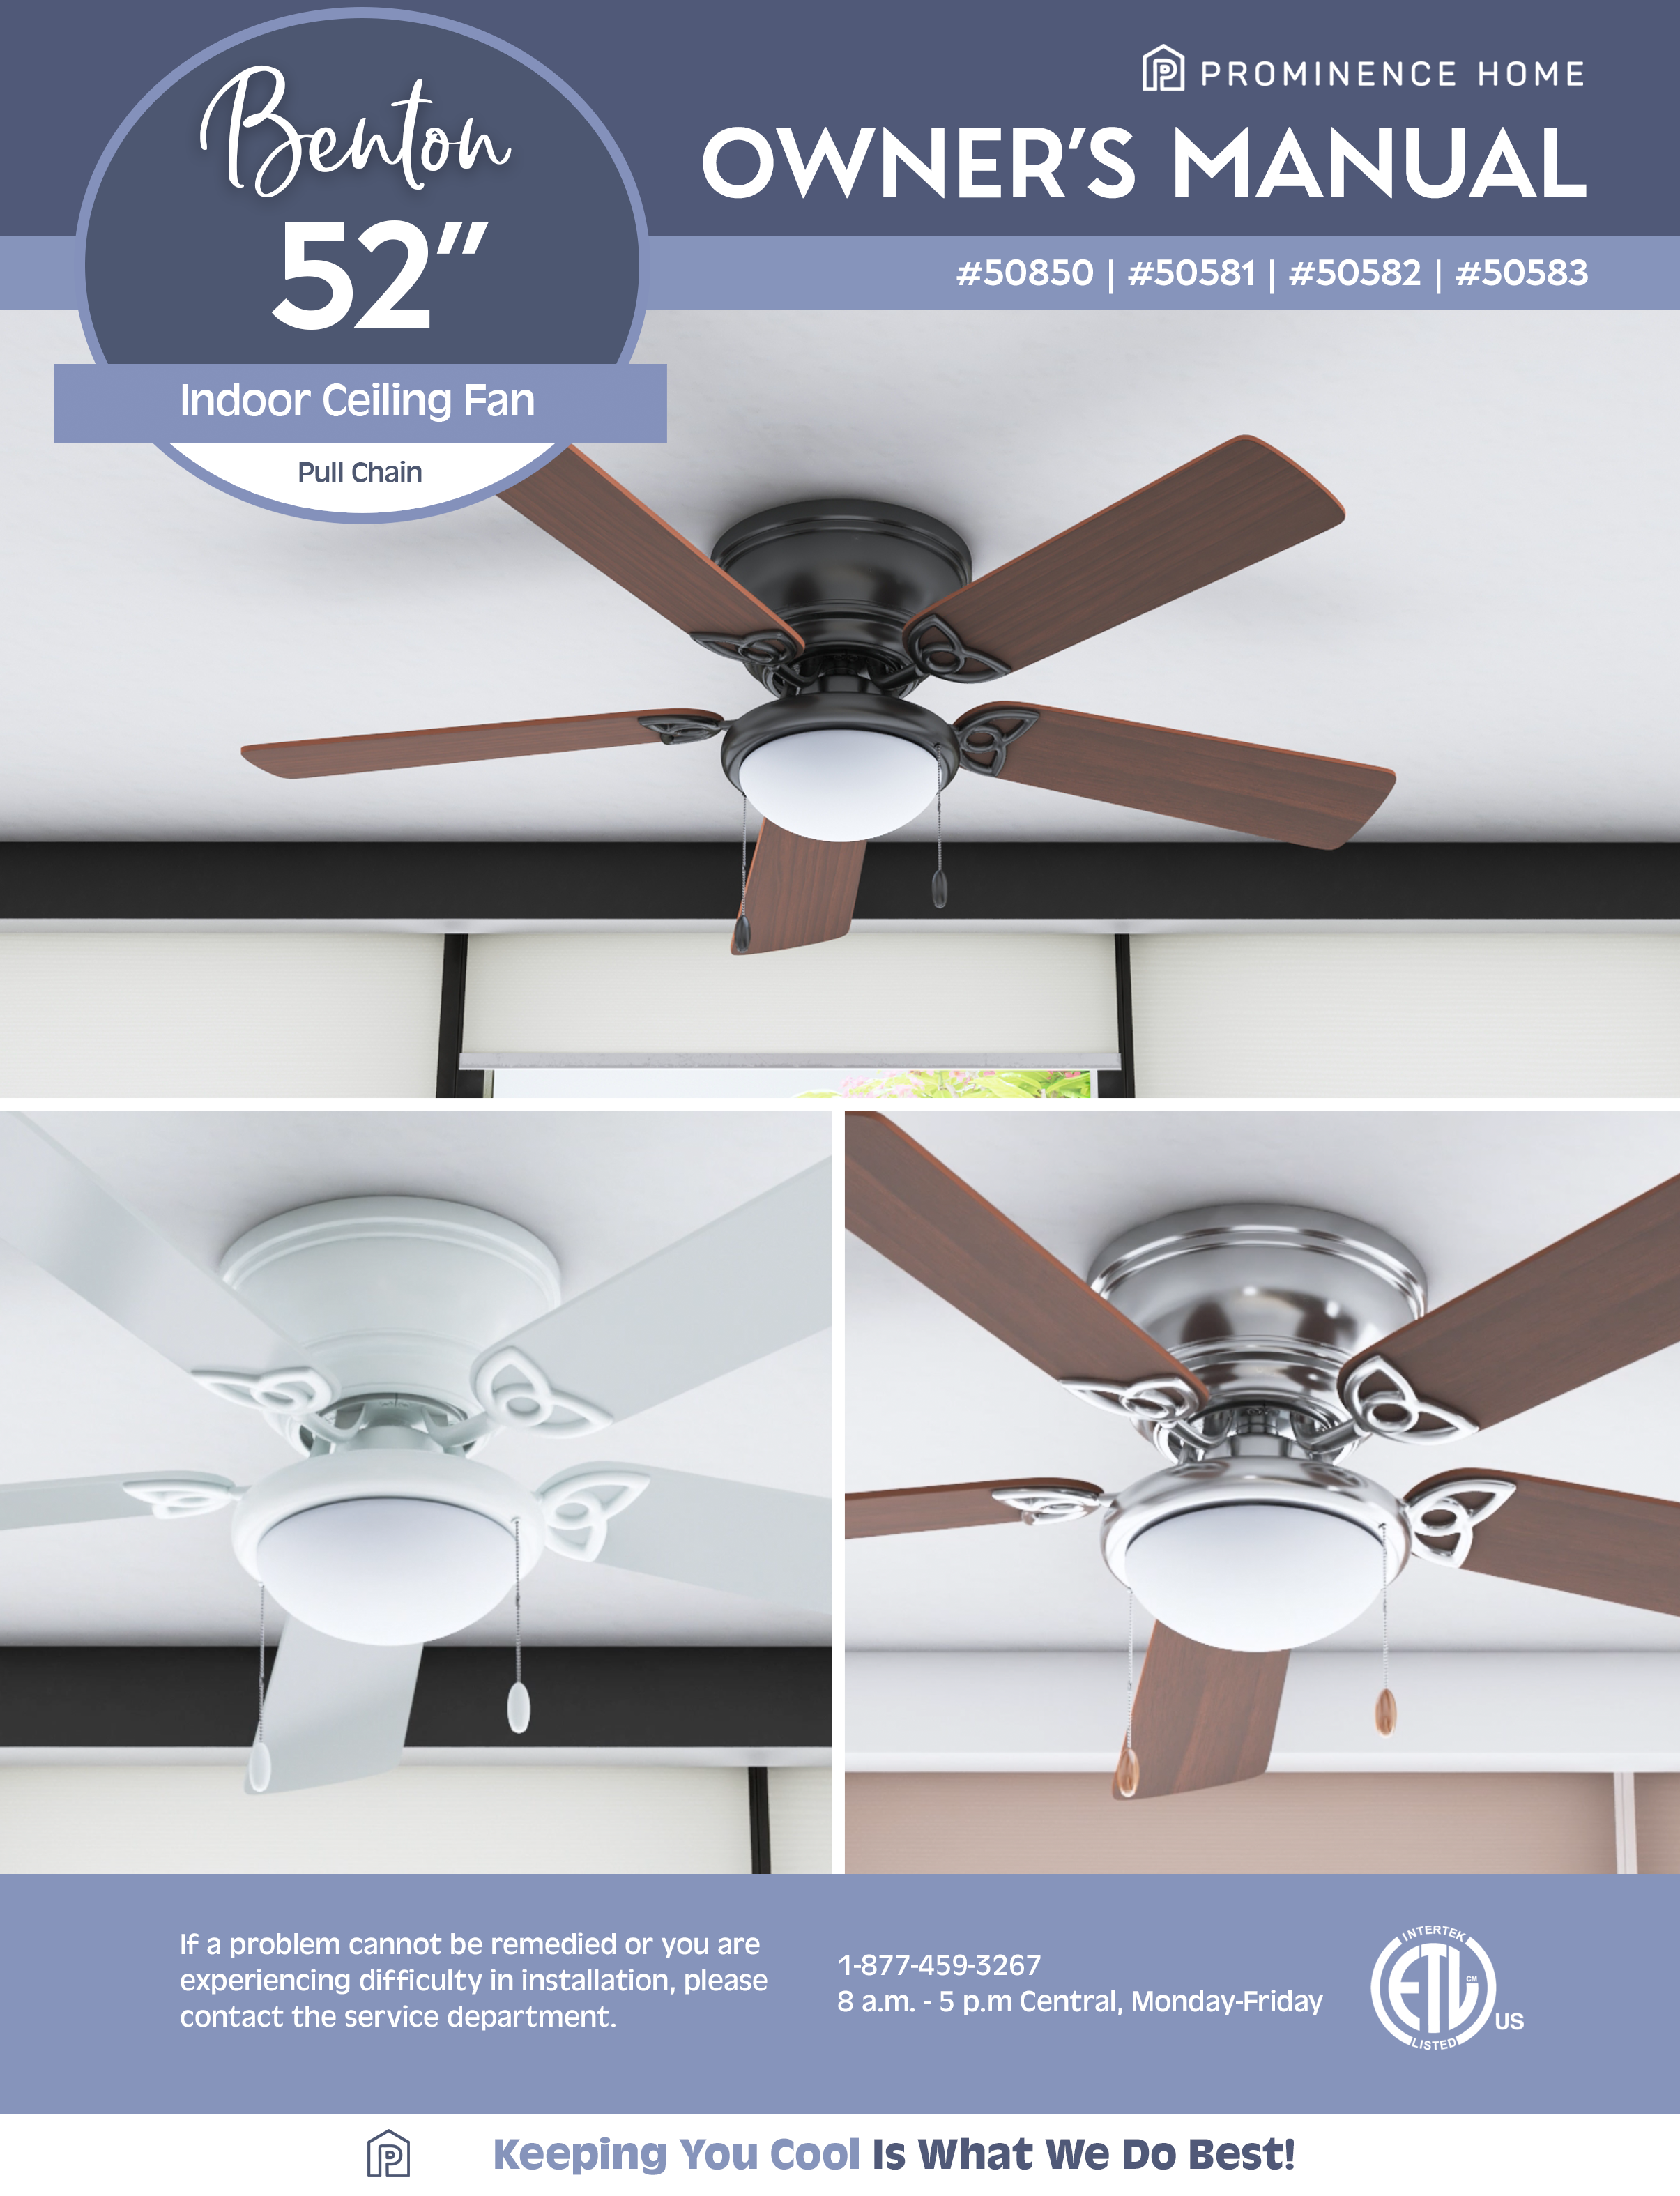 Pull Chain Ceiling Fan Prominence Home